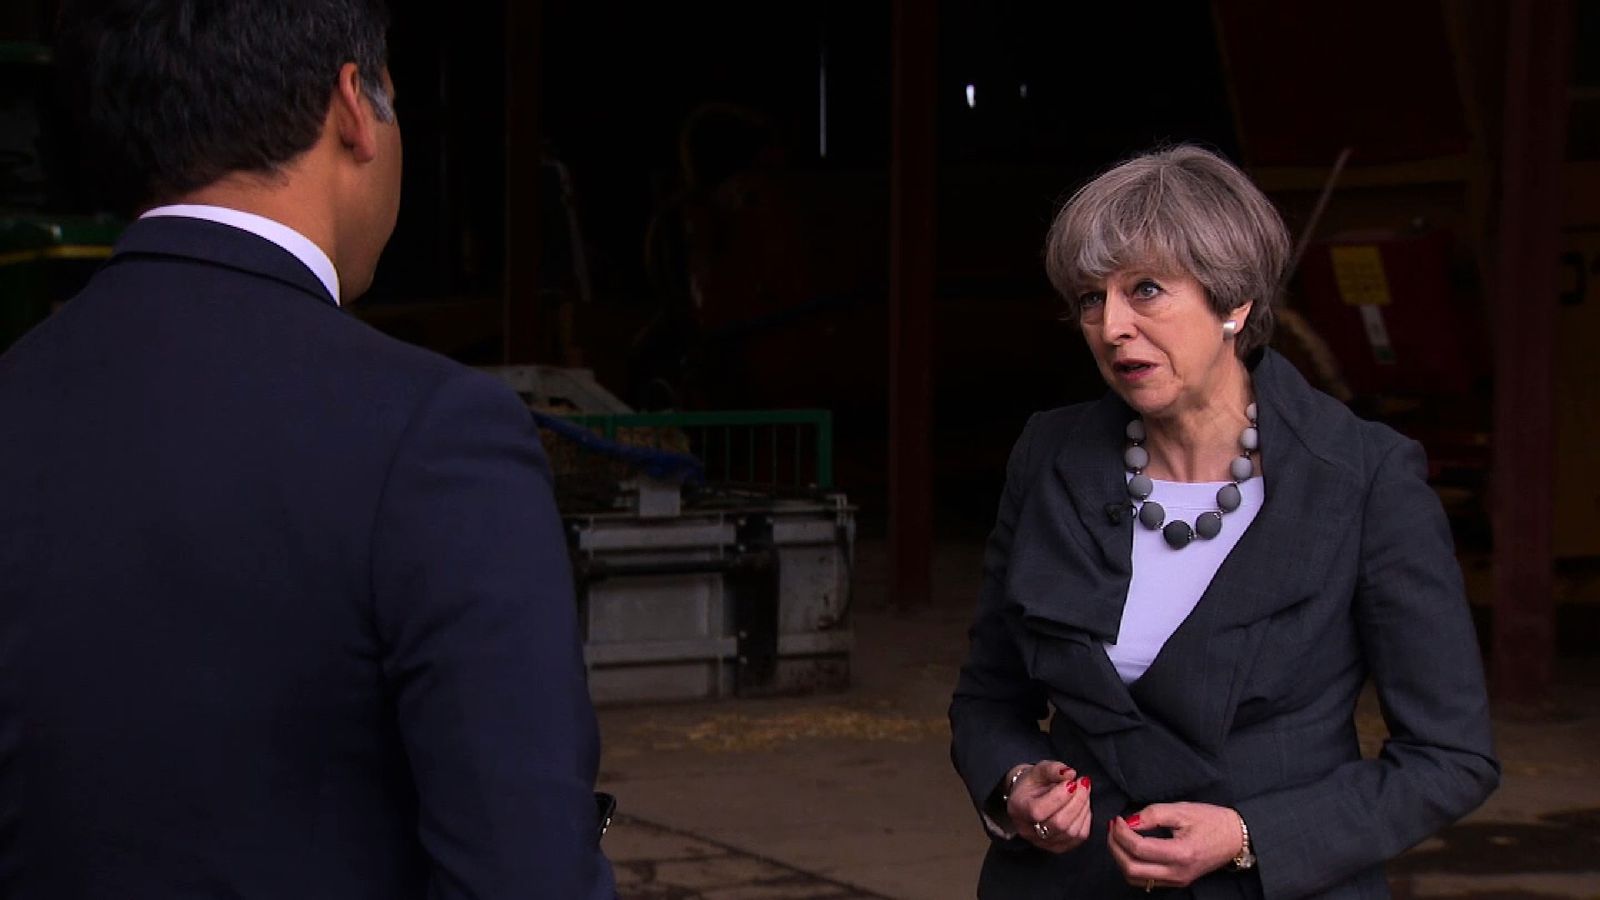 Theresa May responds to questions about terror and what is being done to prevent further attacks